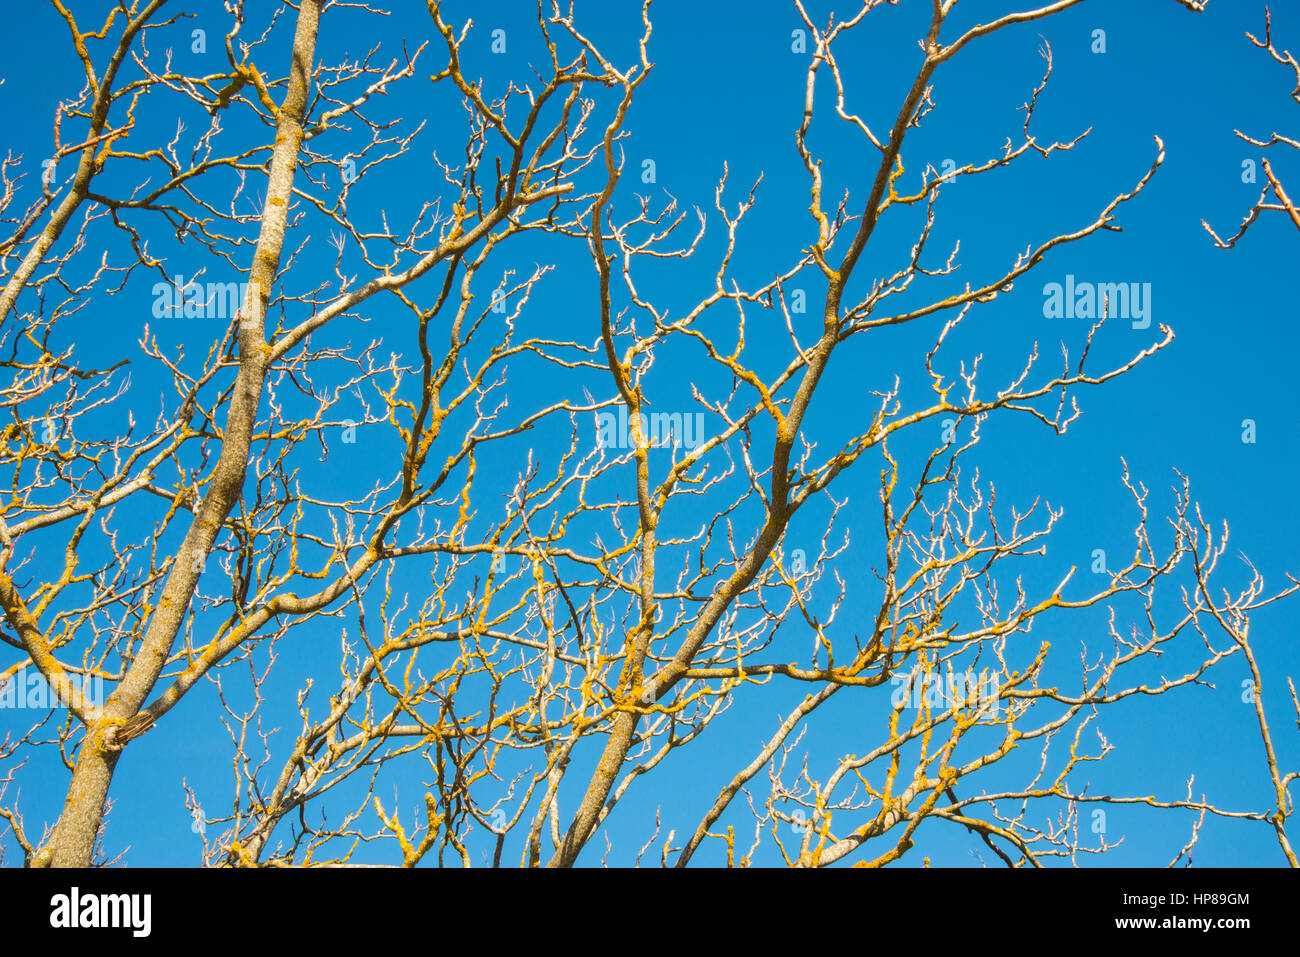 Tree branches in winter against blue sky. Stock Photo